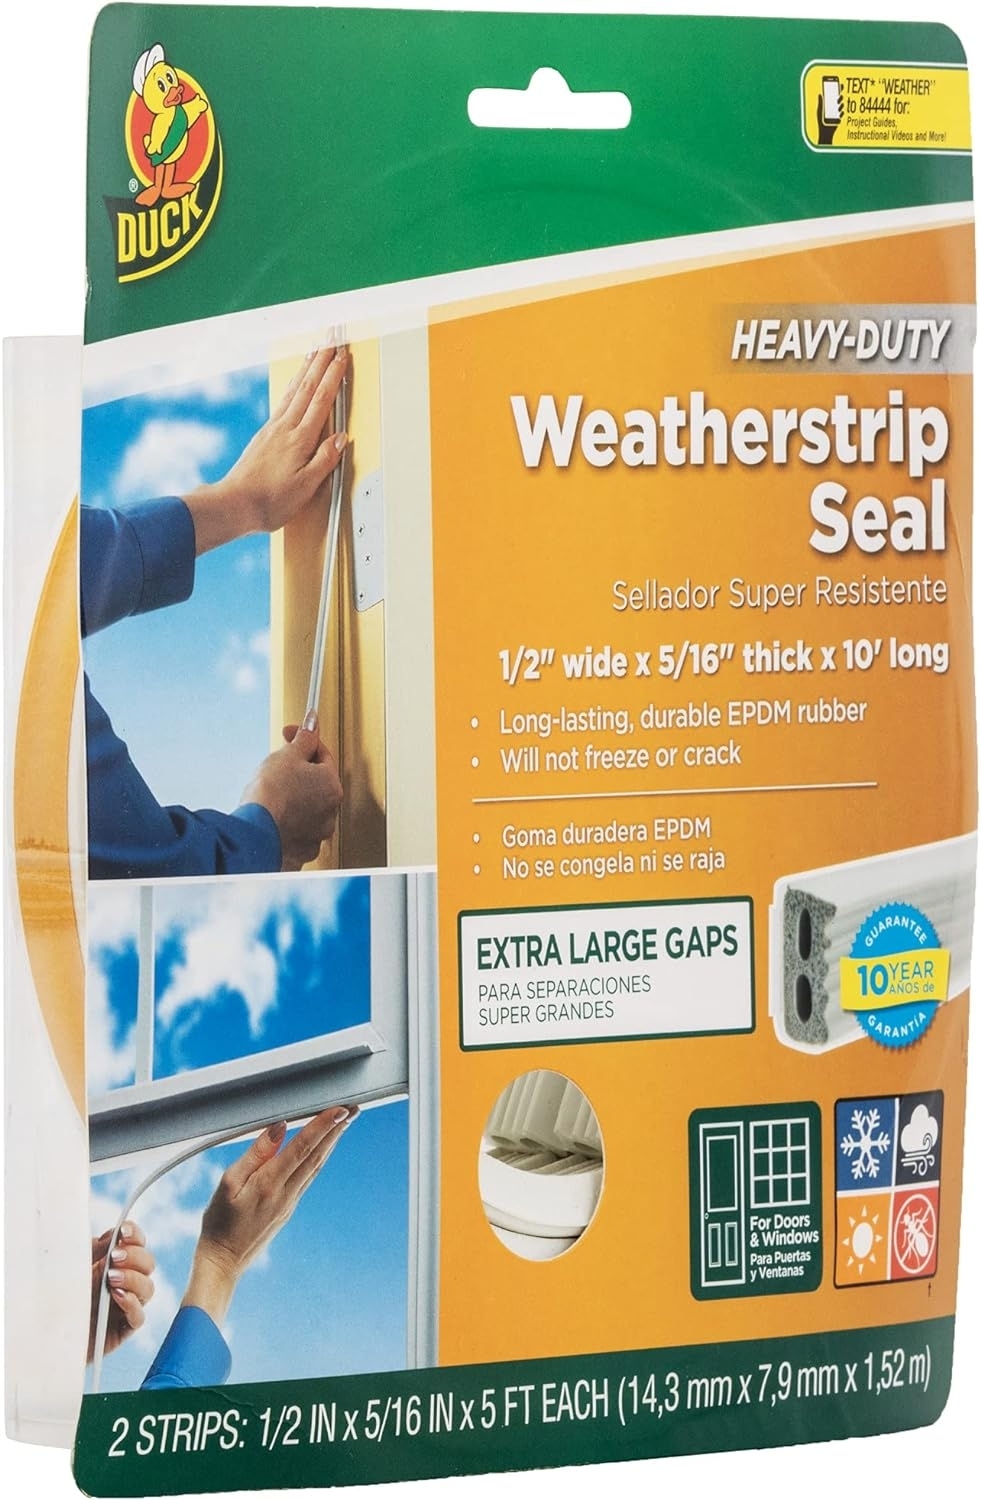 Duck Brand Heavy-Duty Self Adhesive Weatherstrip Seal for Extra Large Gap, 1/2-Inch x 5/16-Inch x 10-Feet, 1 Seal, 282436 , White